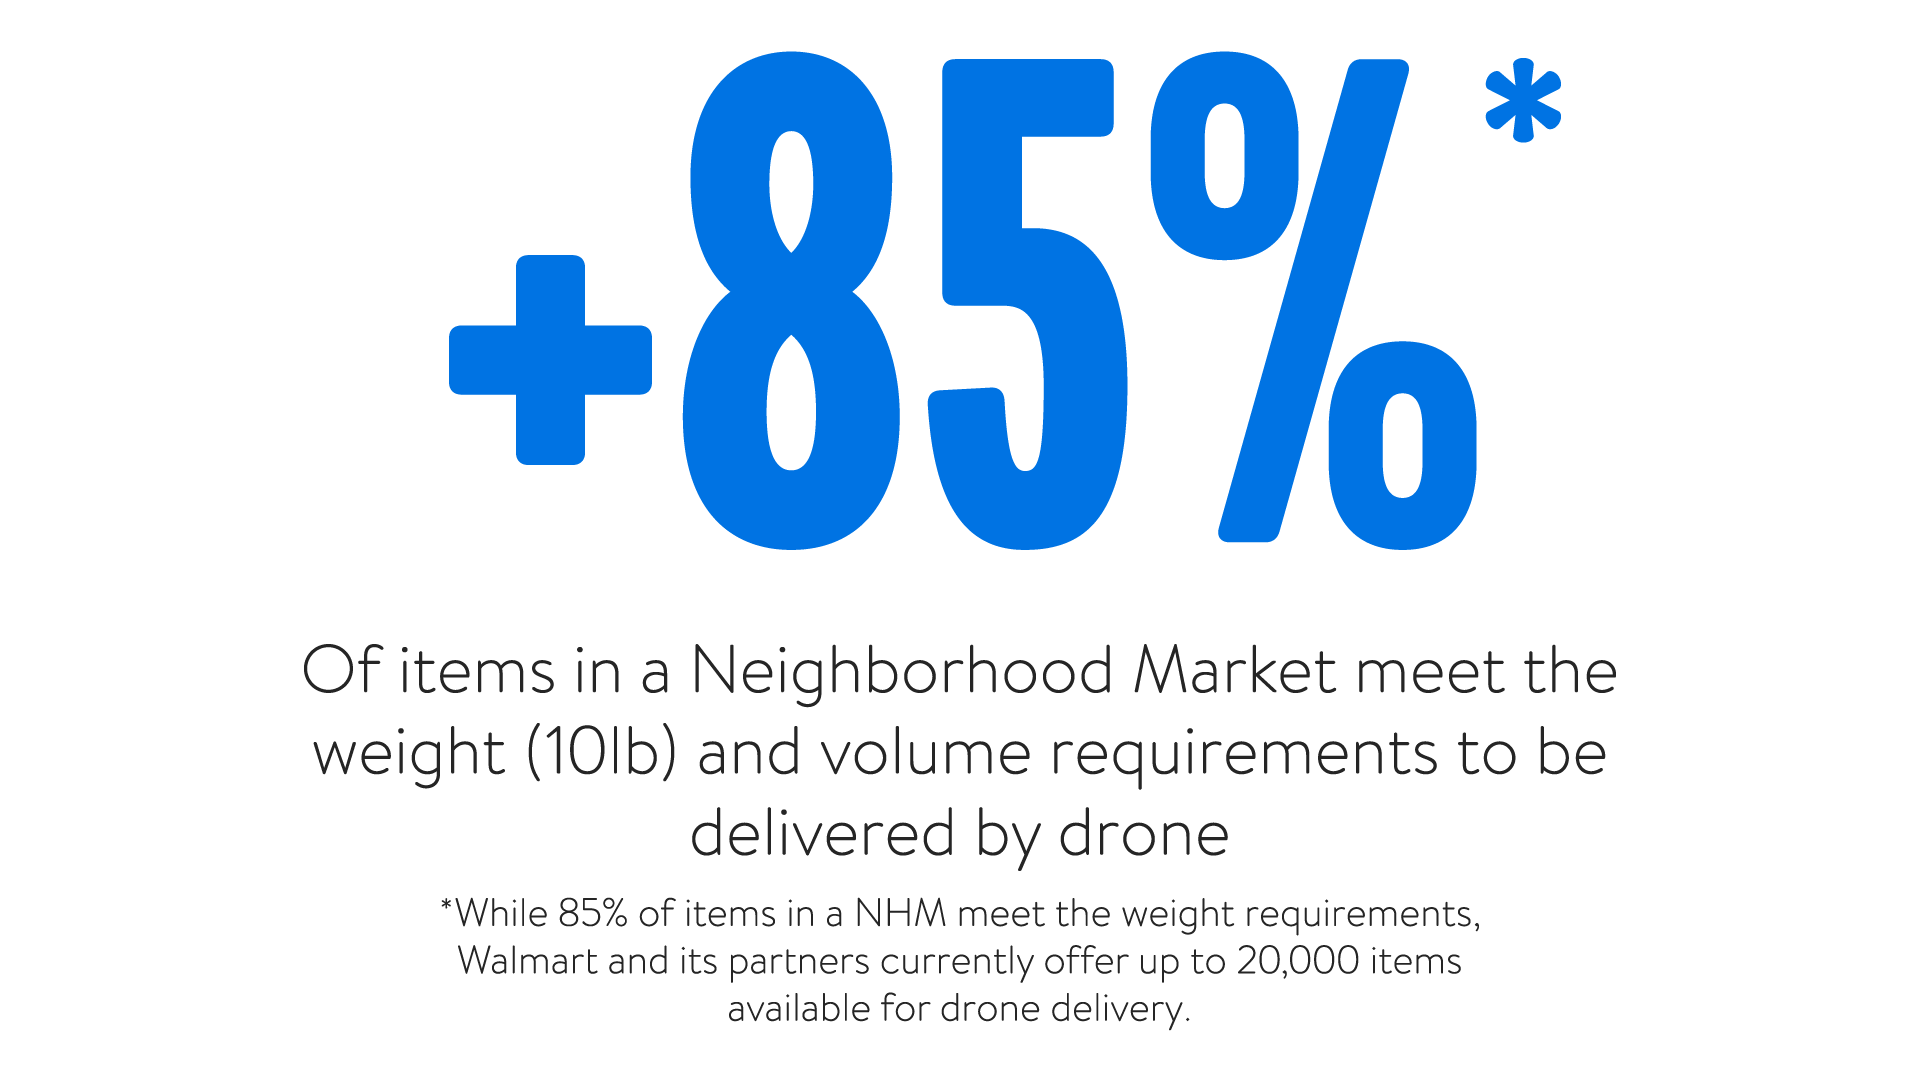 +85%* of items in a Neighborhood Market meet the weight (10lb) and volume requirements to be delivered by drone*While 85% of items in a NHM meet the weight requirements, Walmart and its partners currently offer nearly 20,000 items available for drone delivery